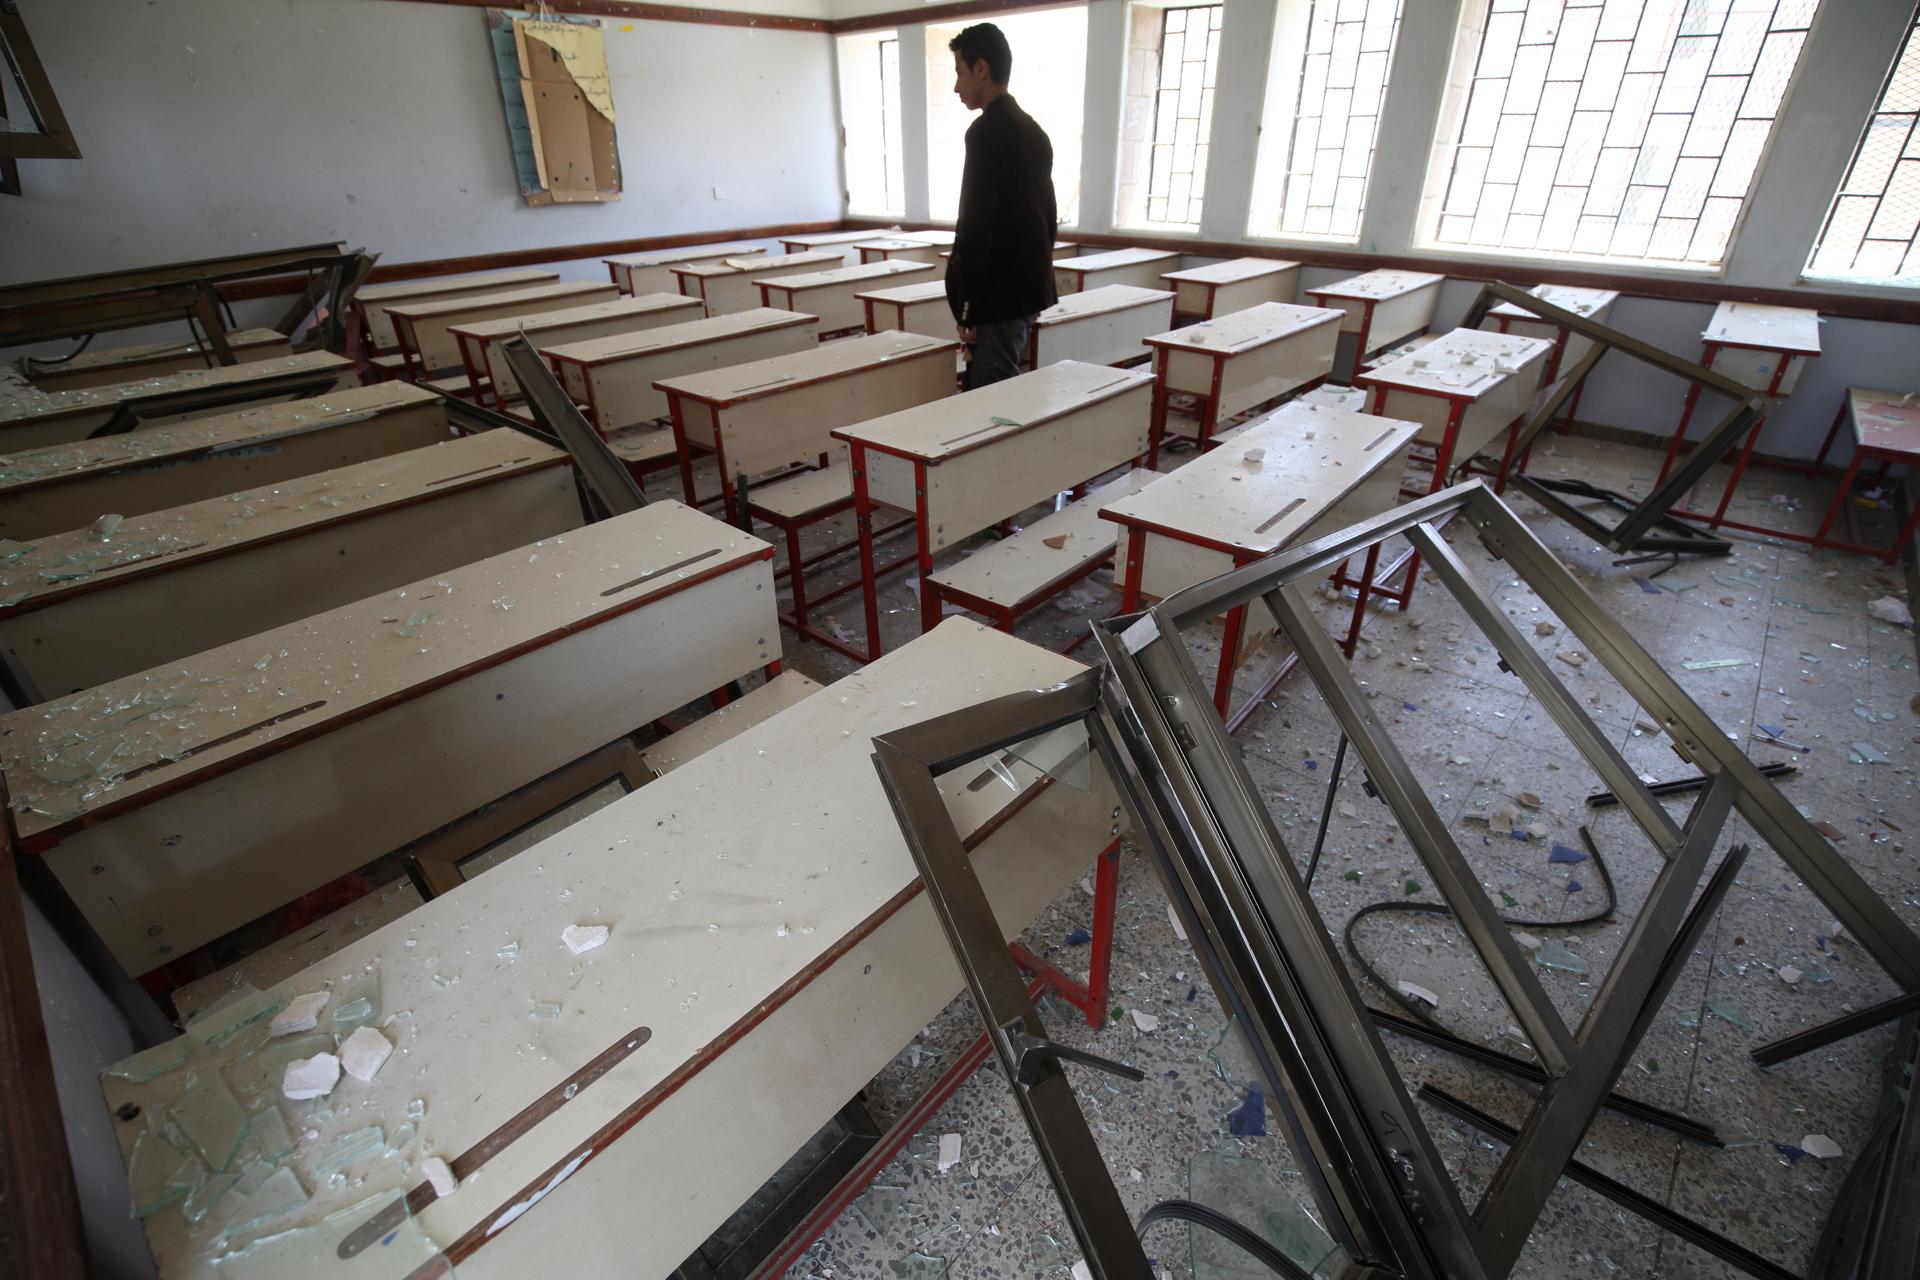 April 2015. This classroom in the Ibn Sina School in the Yemeni capital, Sanaa, suffered damage during an air strike. The school, which has 1,500 girl students, is closed indefinitely.